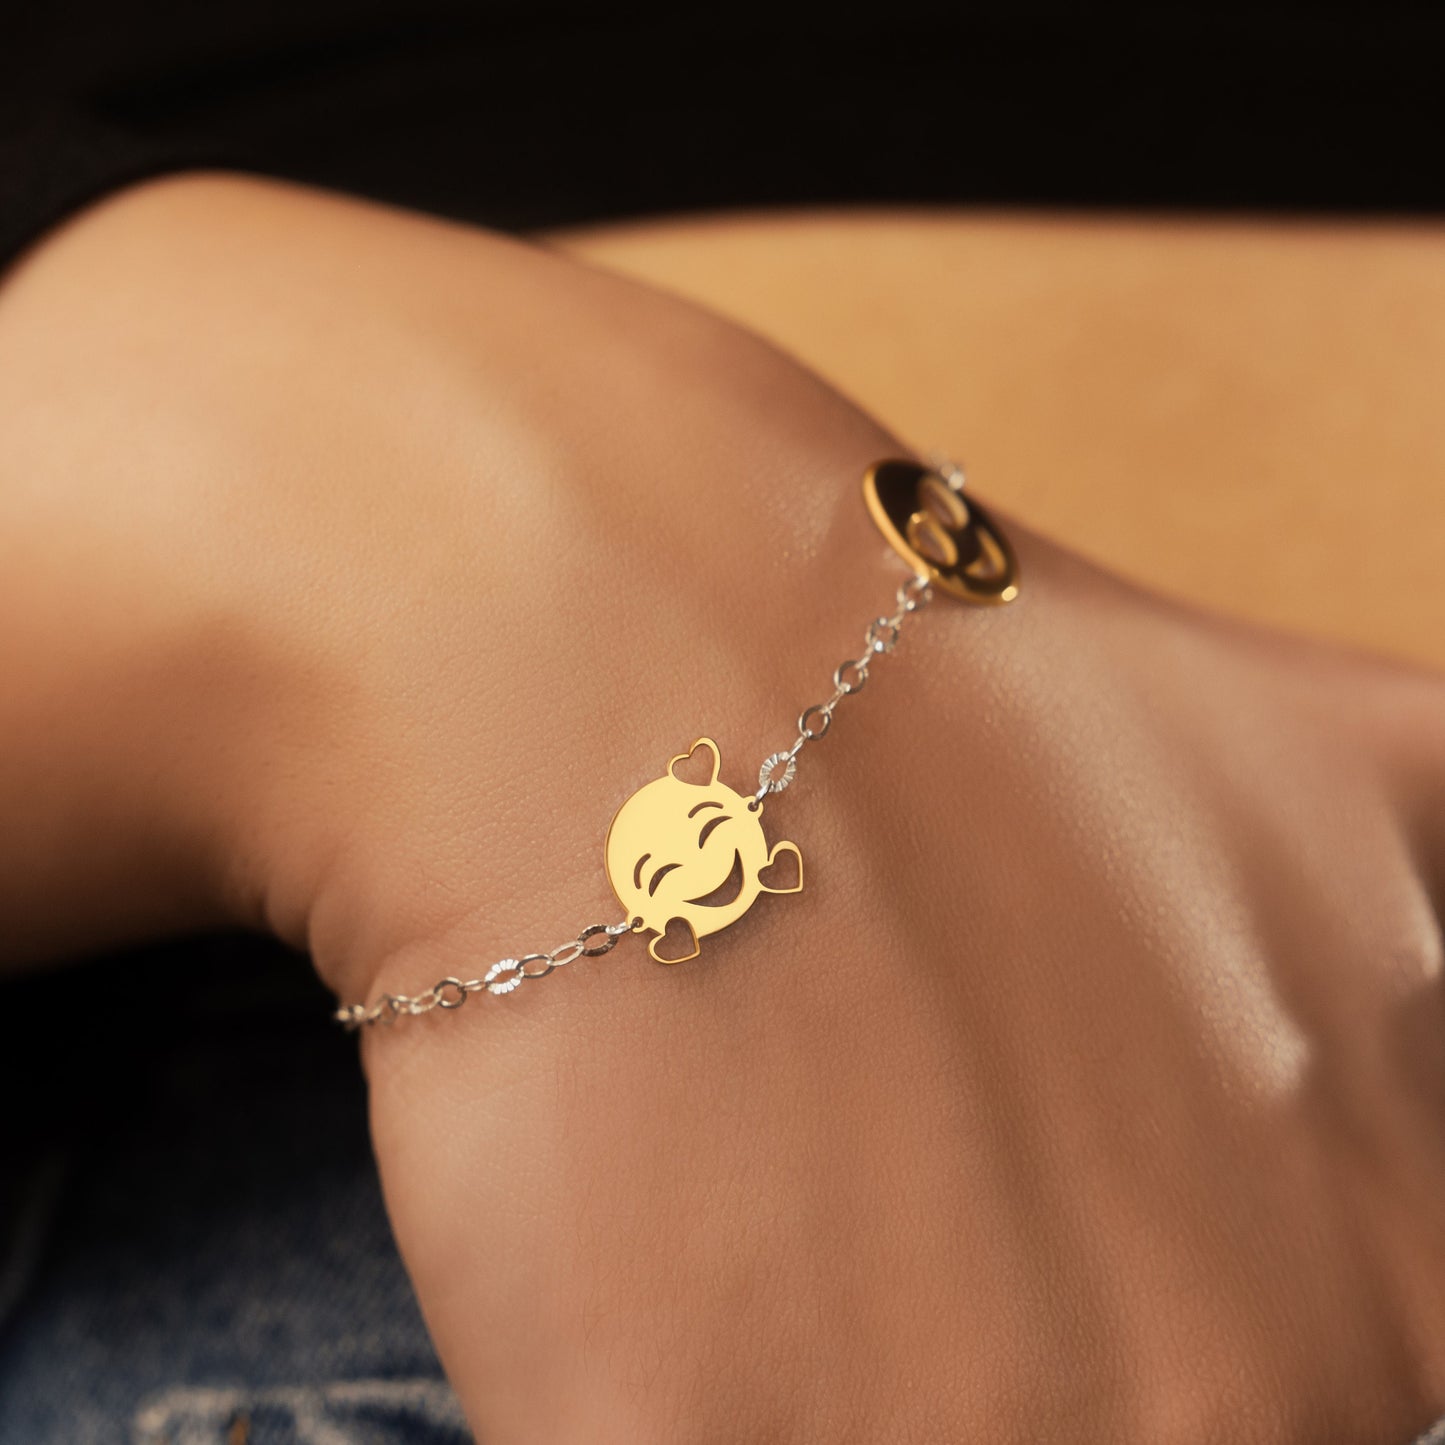 Smiley Face and Initial Bracelet